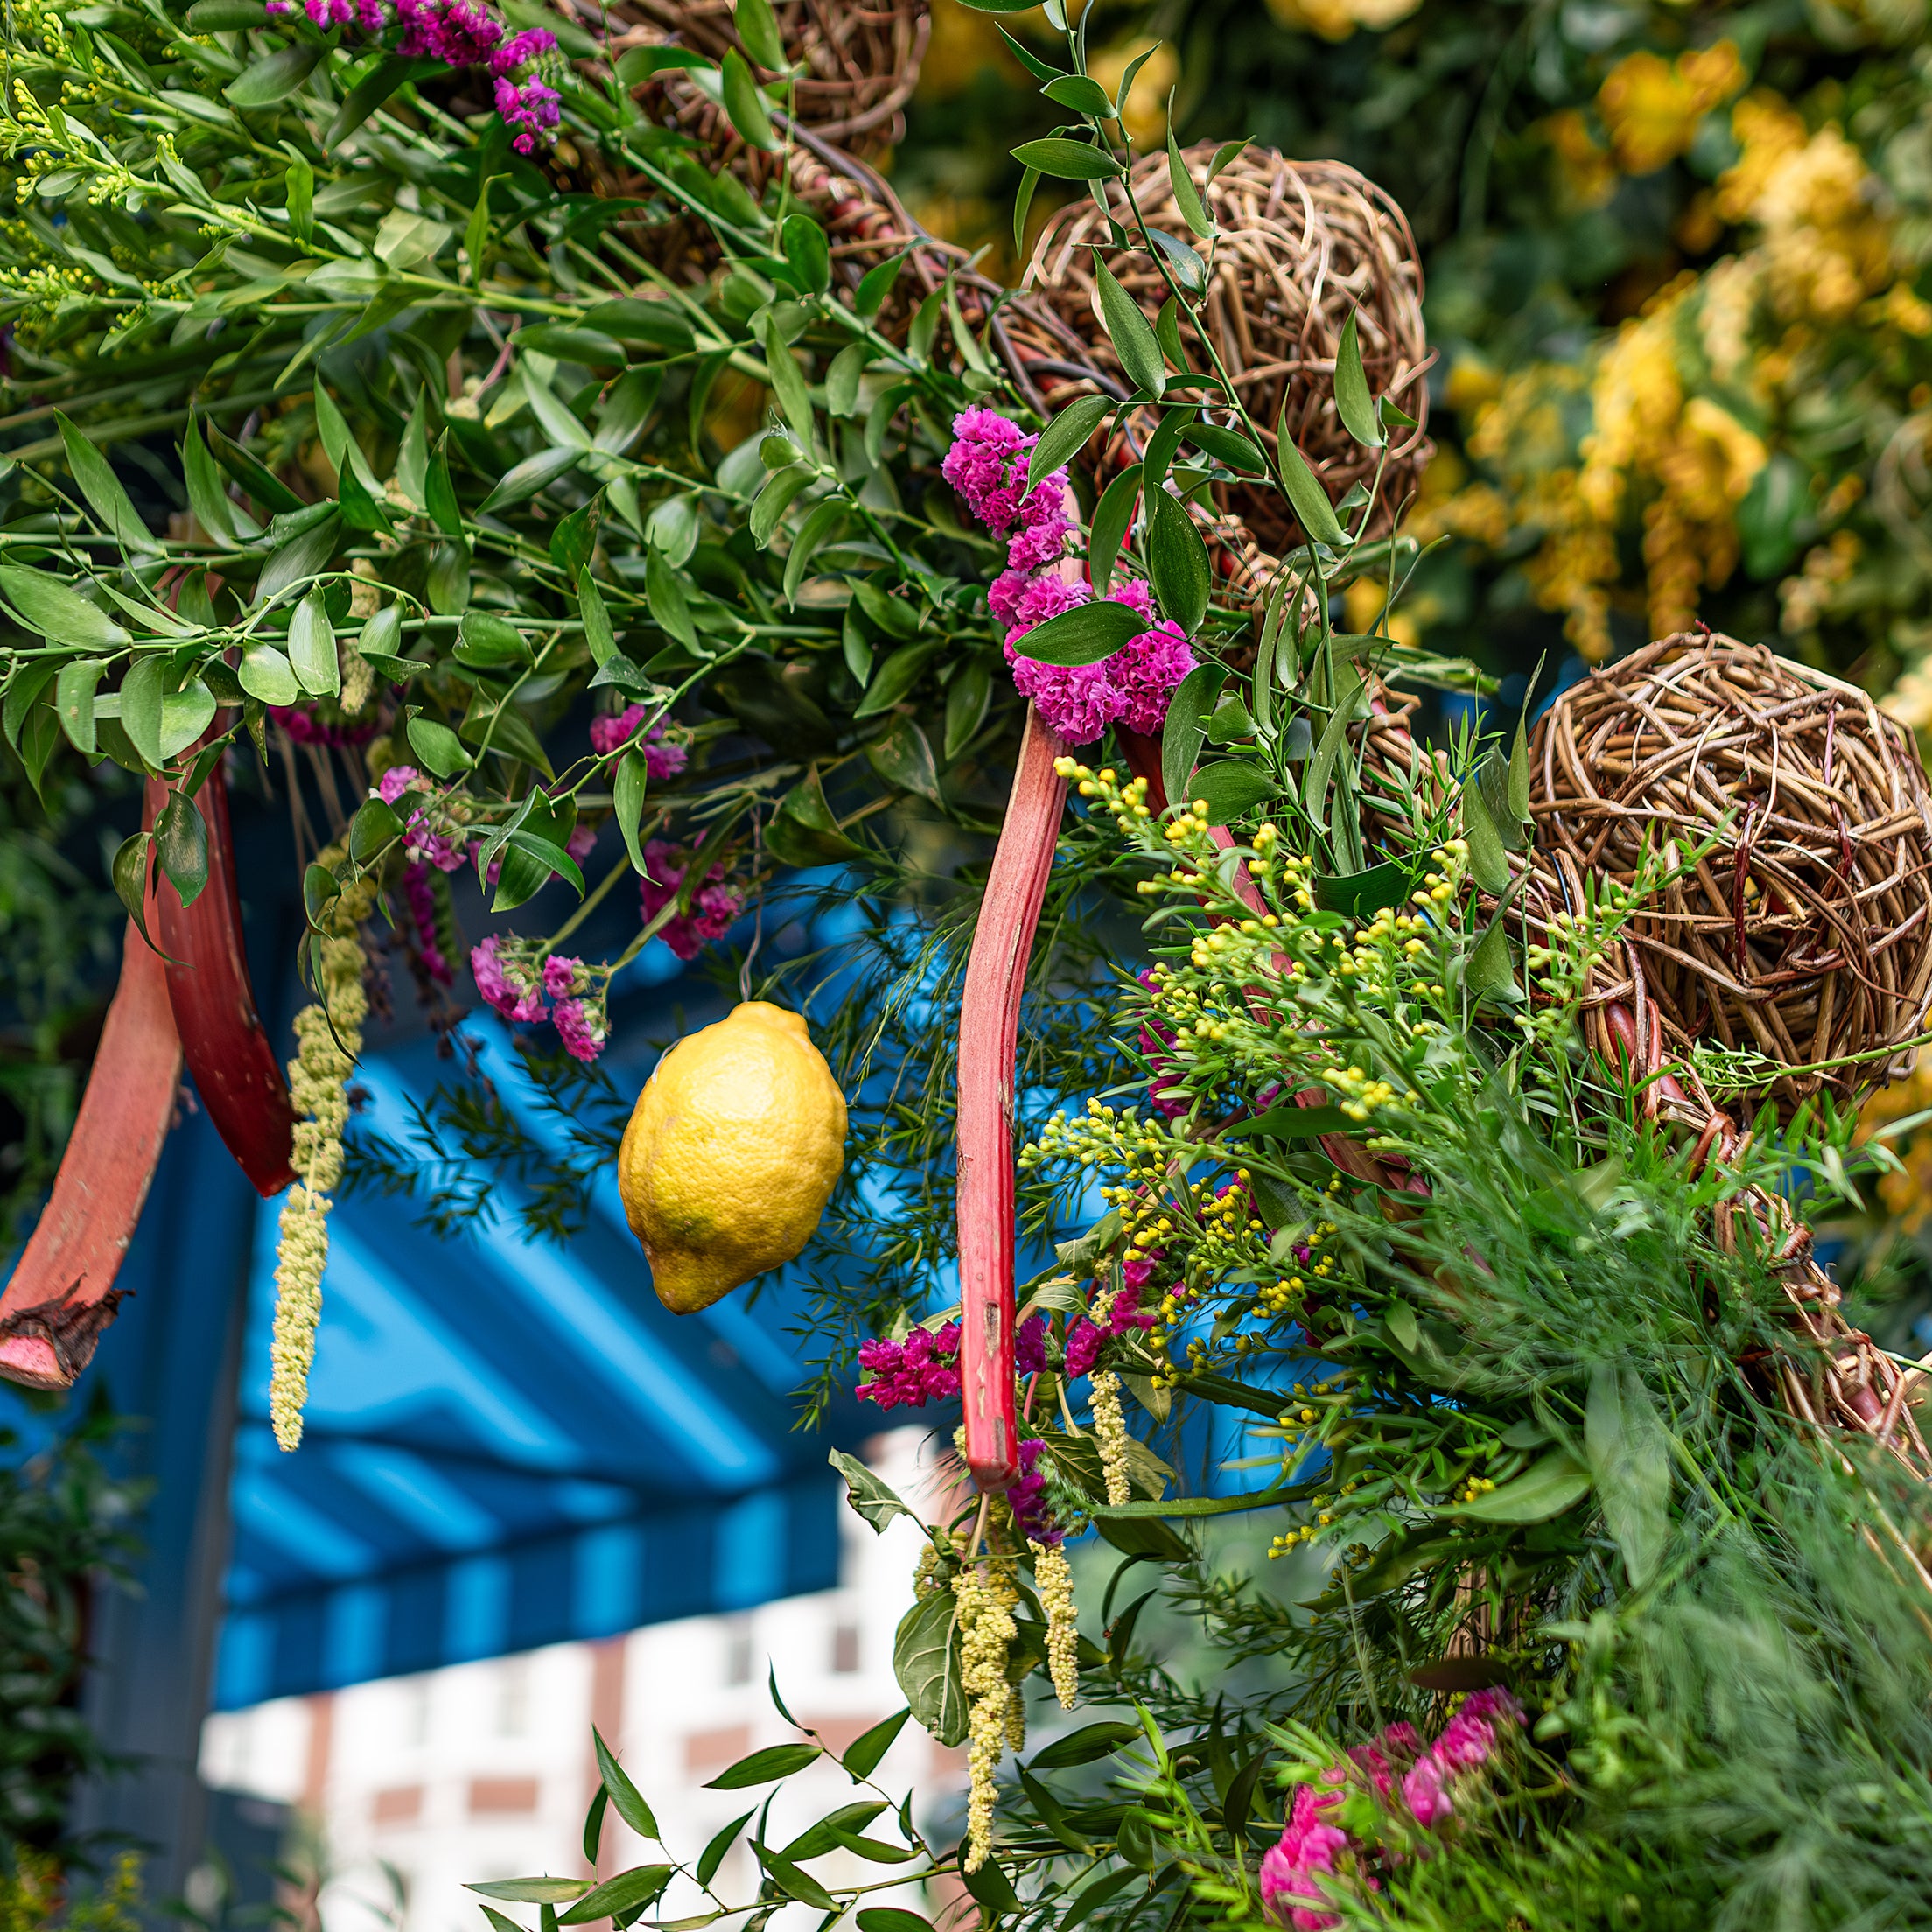 Close-up of an intricate floral arrangement in the shape of an arch designed by event florist Amaranté London for the Chelsea in Bloom event, featuring vibrant green foliage, pink statice flowers, yellow solidago, and a prominent lemon, set against a blue awning.